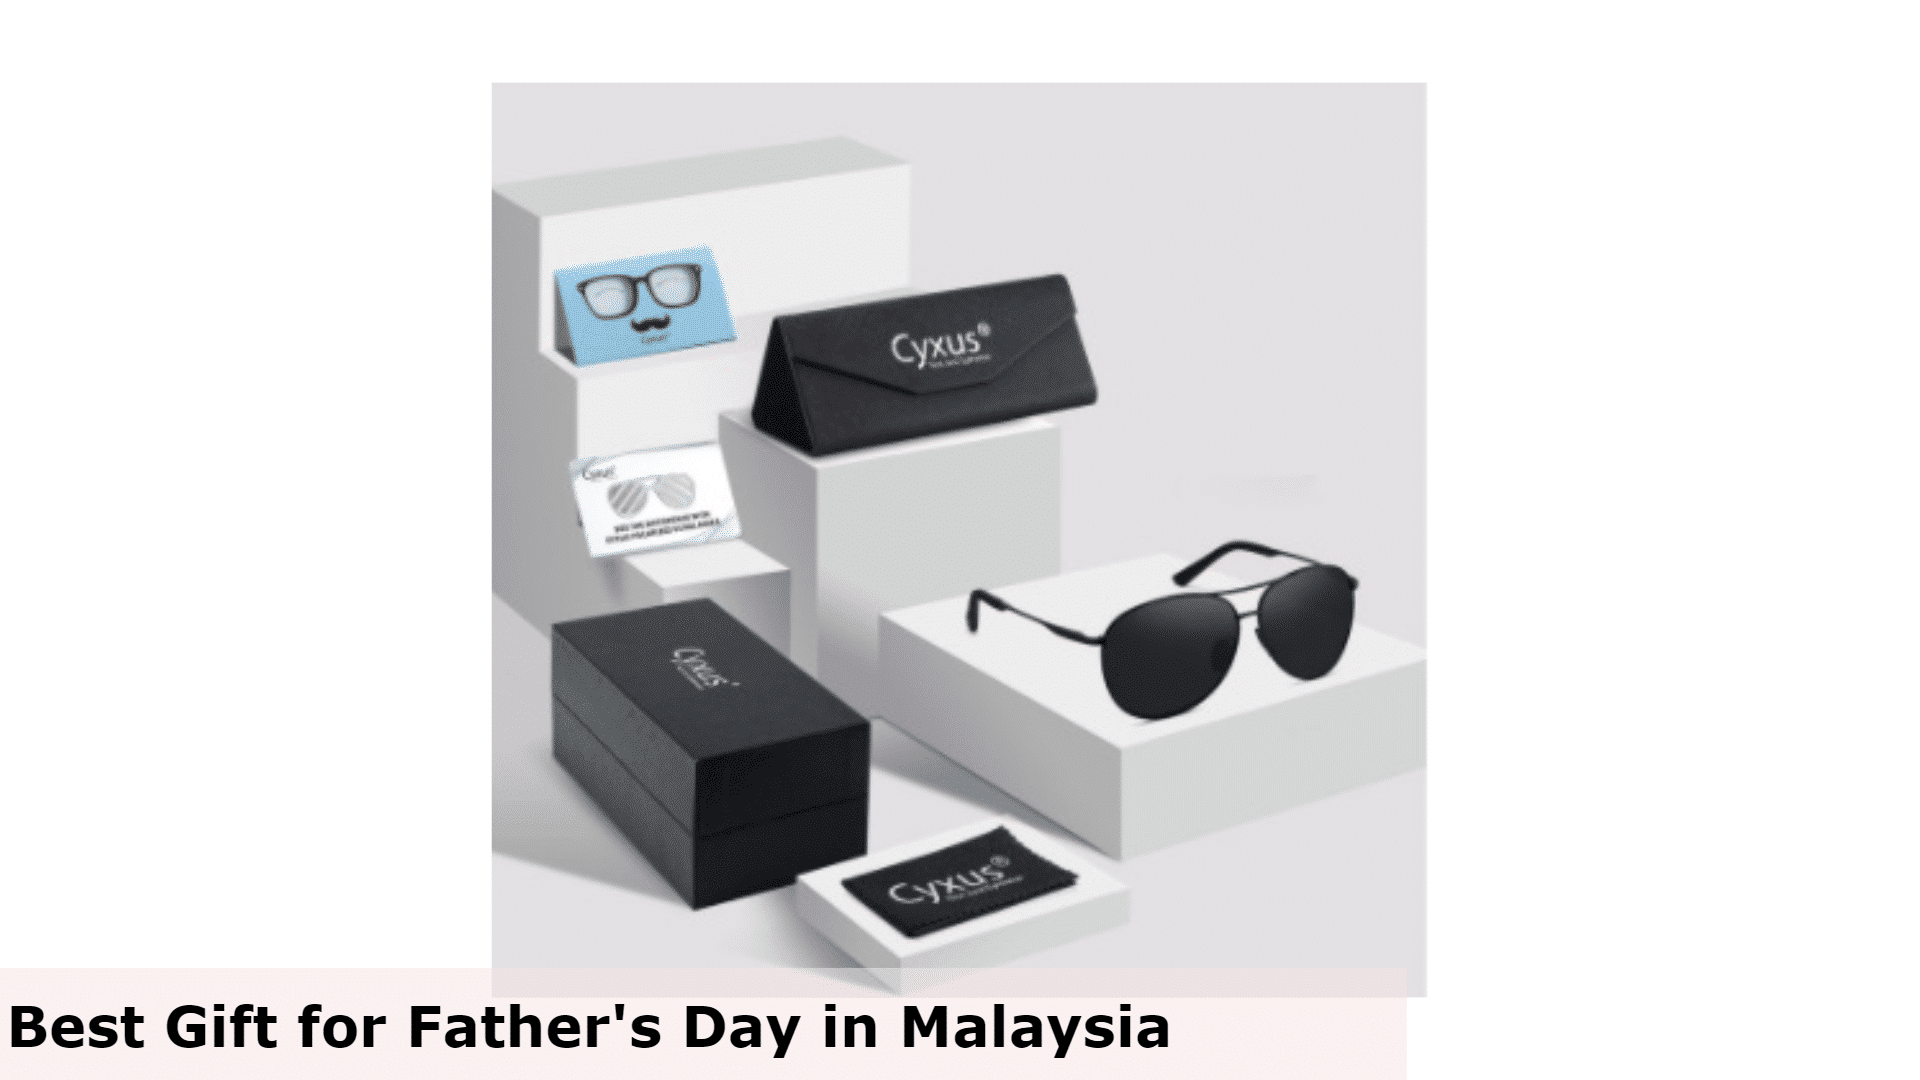 Sunglasses - Best Gift for Father's Day in Malaysia, Best gift for Father's Day Malaysia, Best Father's Day Gifts for Dad, What do dads want for Father's Day in Malaysia?, What is a good cheap gift for Father's Day in Malaysia?, Do you give gifts on Father's Day in Malaysia?, gifts for dad who wants nothing, simple father's day gift ideas, father's day gift ideas 2022, father's day gift ideas during covid, father's day gift ideas from daughter, unique gifts for dad, father's day gift ideas from wife, fathers day gifts from son, What buy for a dad that doesn't want anything?, What to get a dad that is hard to buy for?, What should I get my boring dad for Christmas?, What gifts do dads like?,